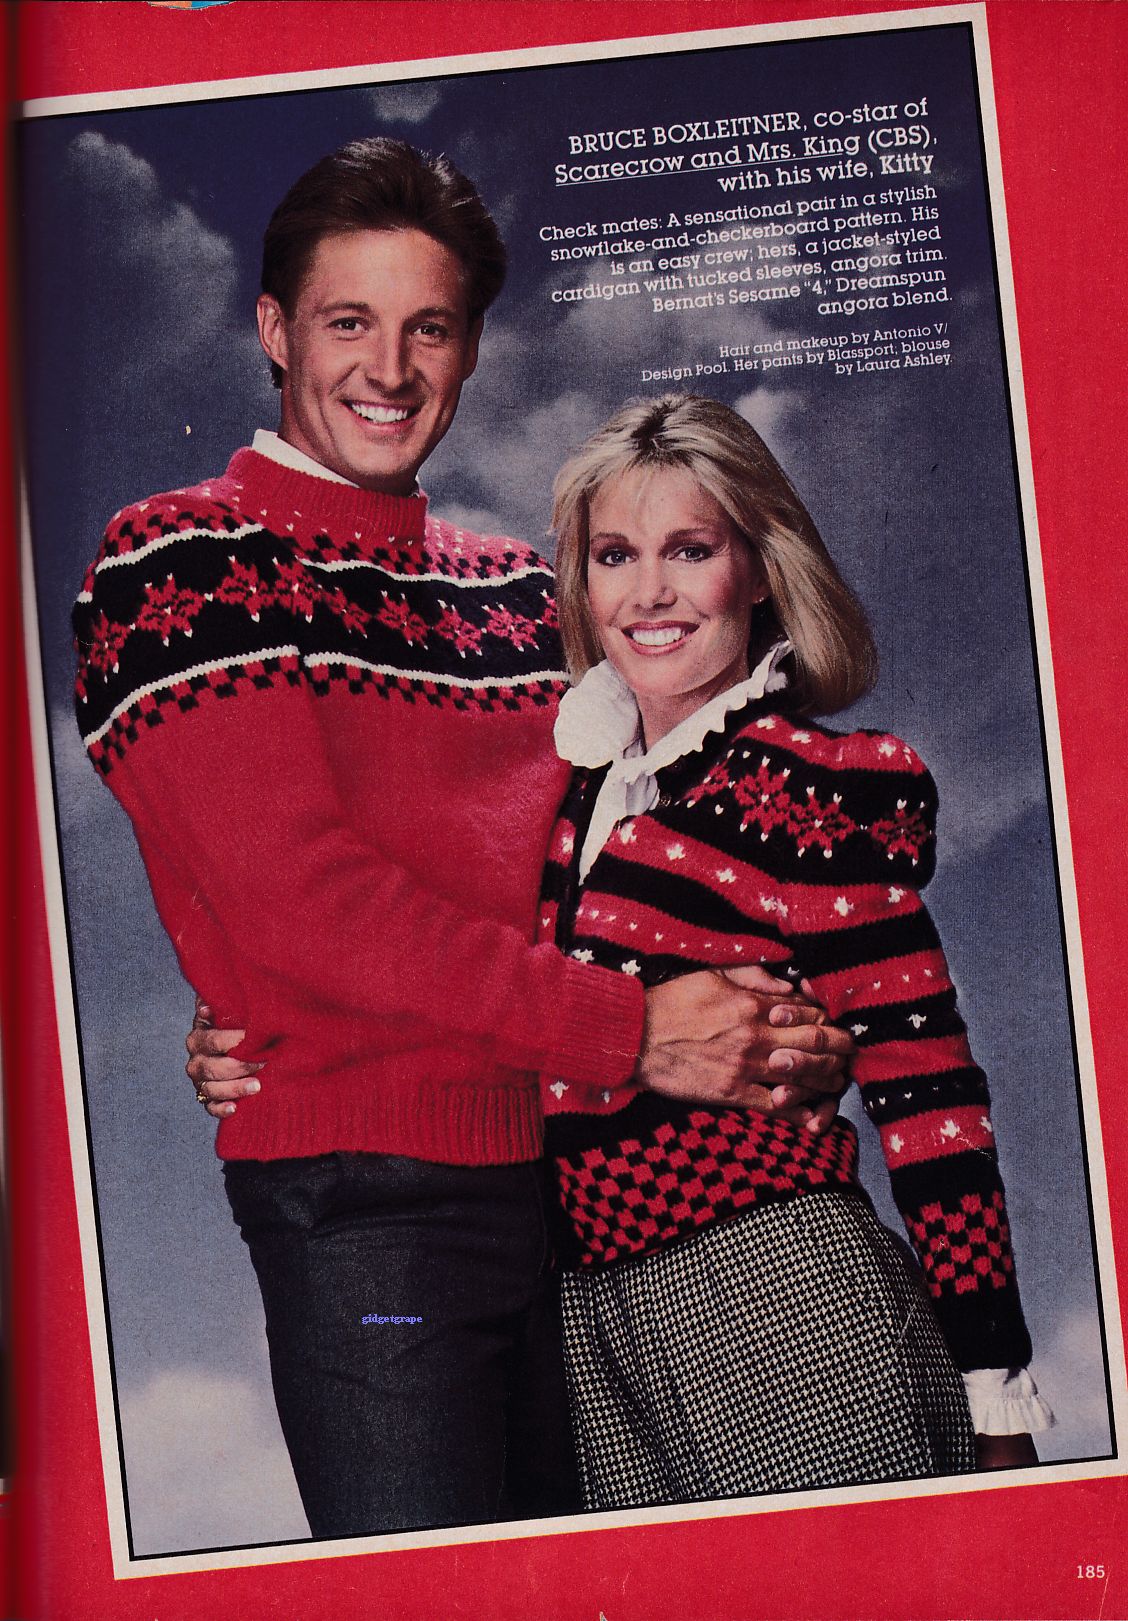 Bruce Boxleitner and his wife in matching sweaters Online